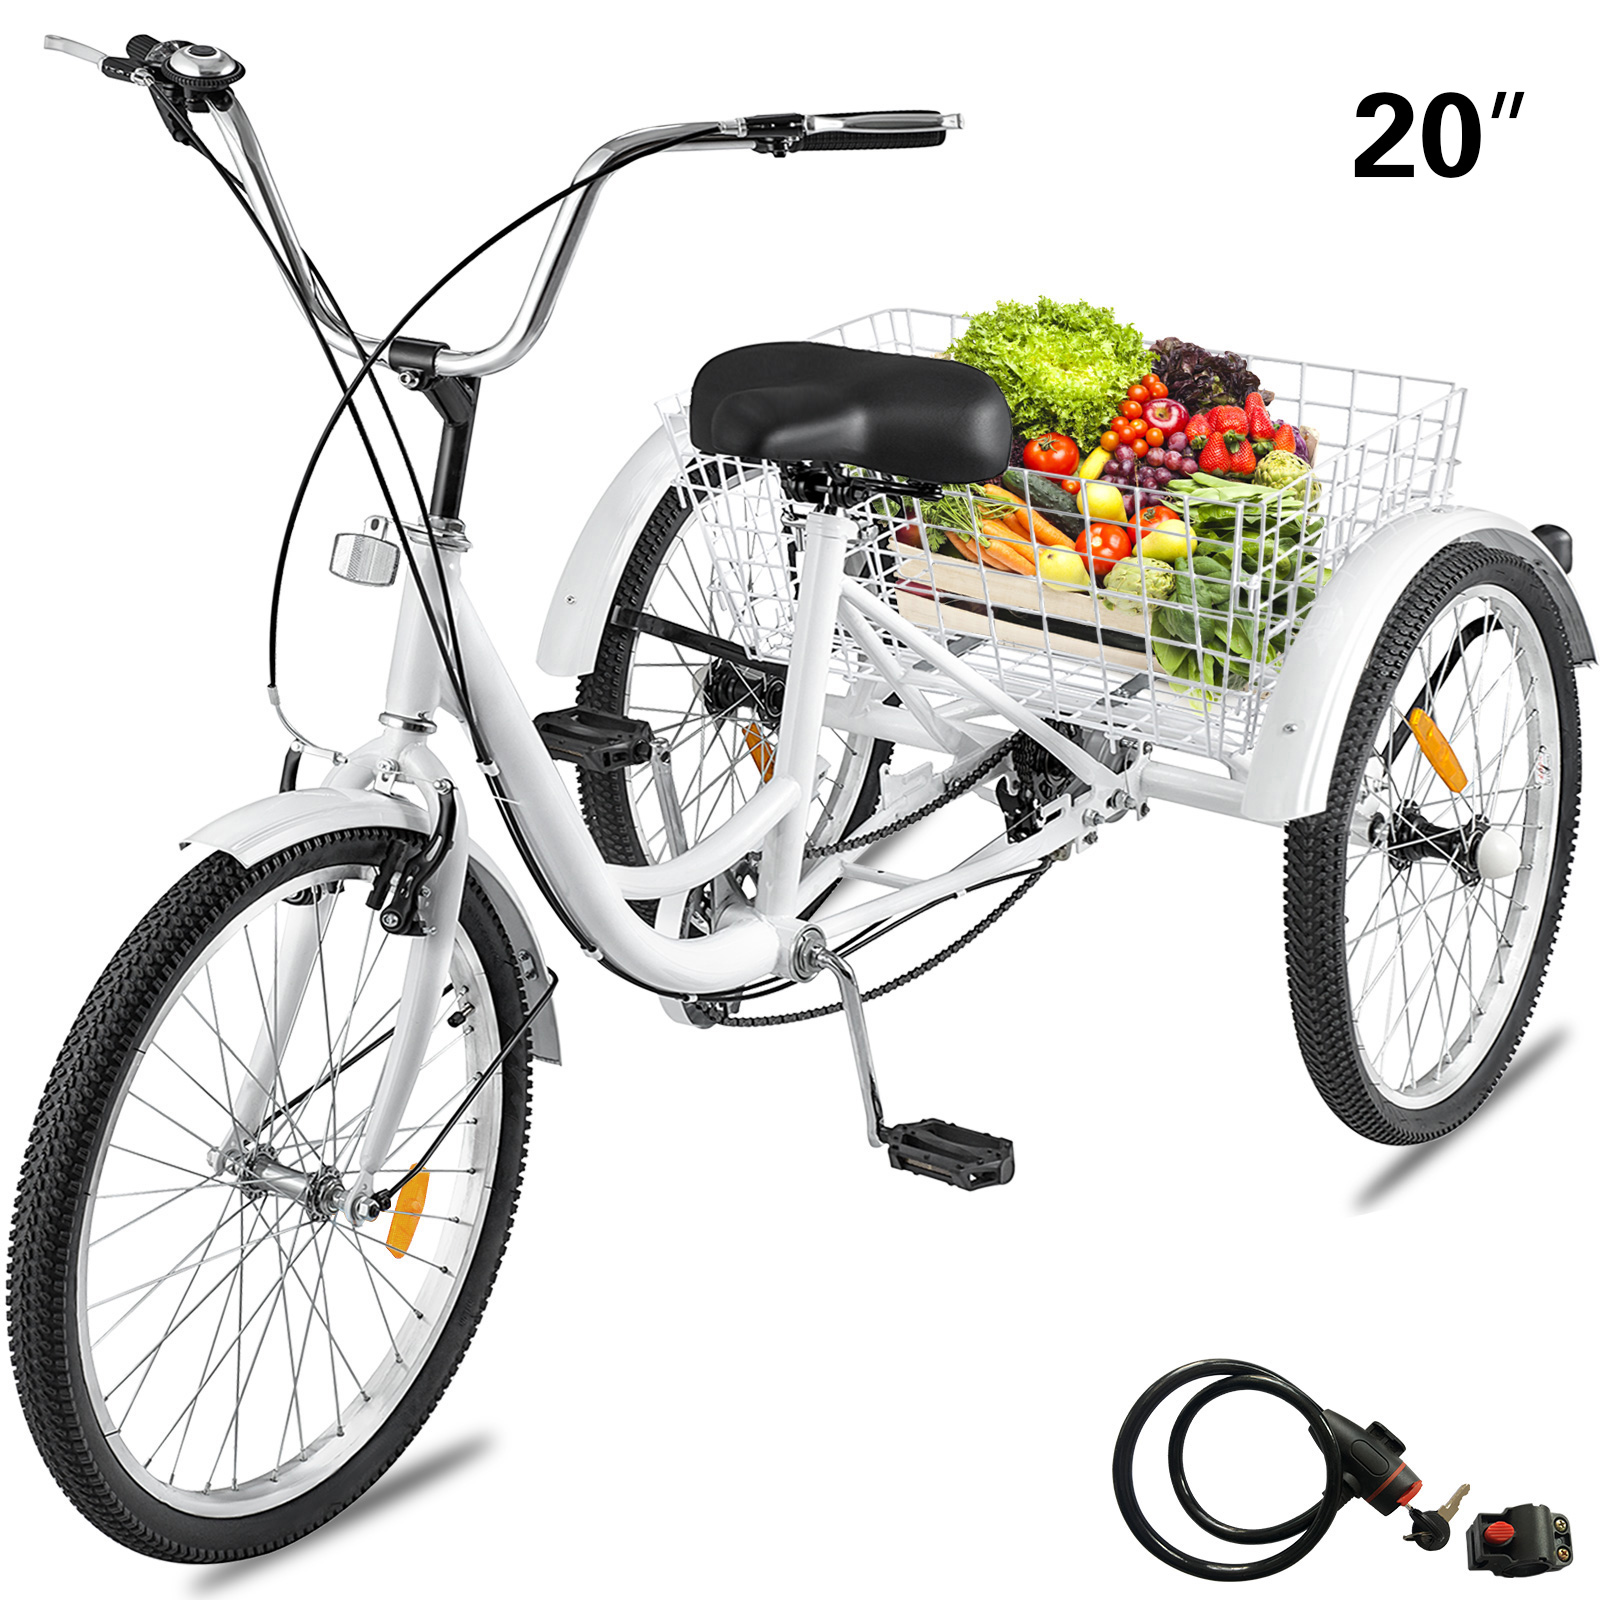 adult tricycle,24in,7 speed